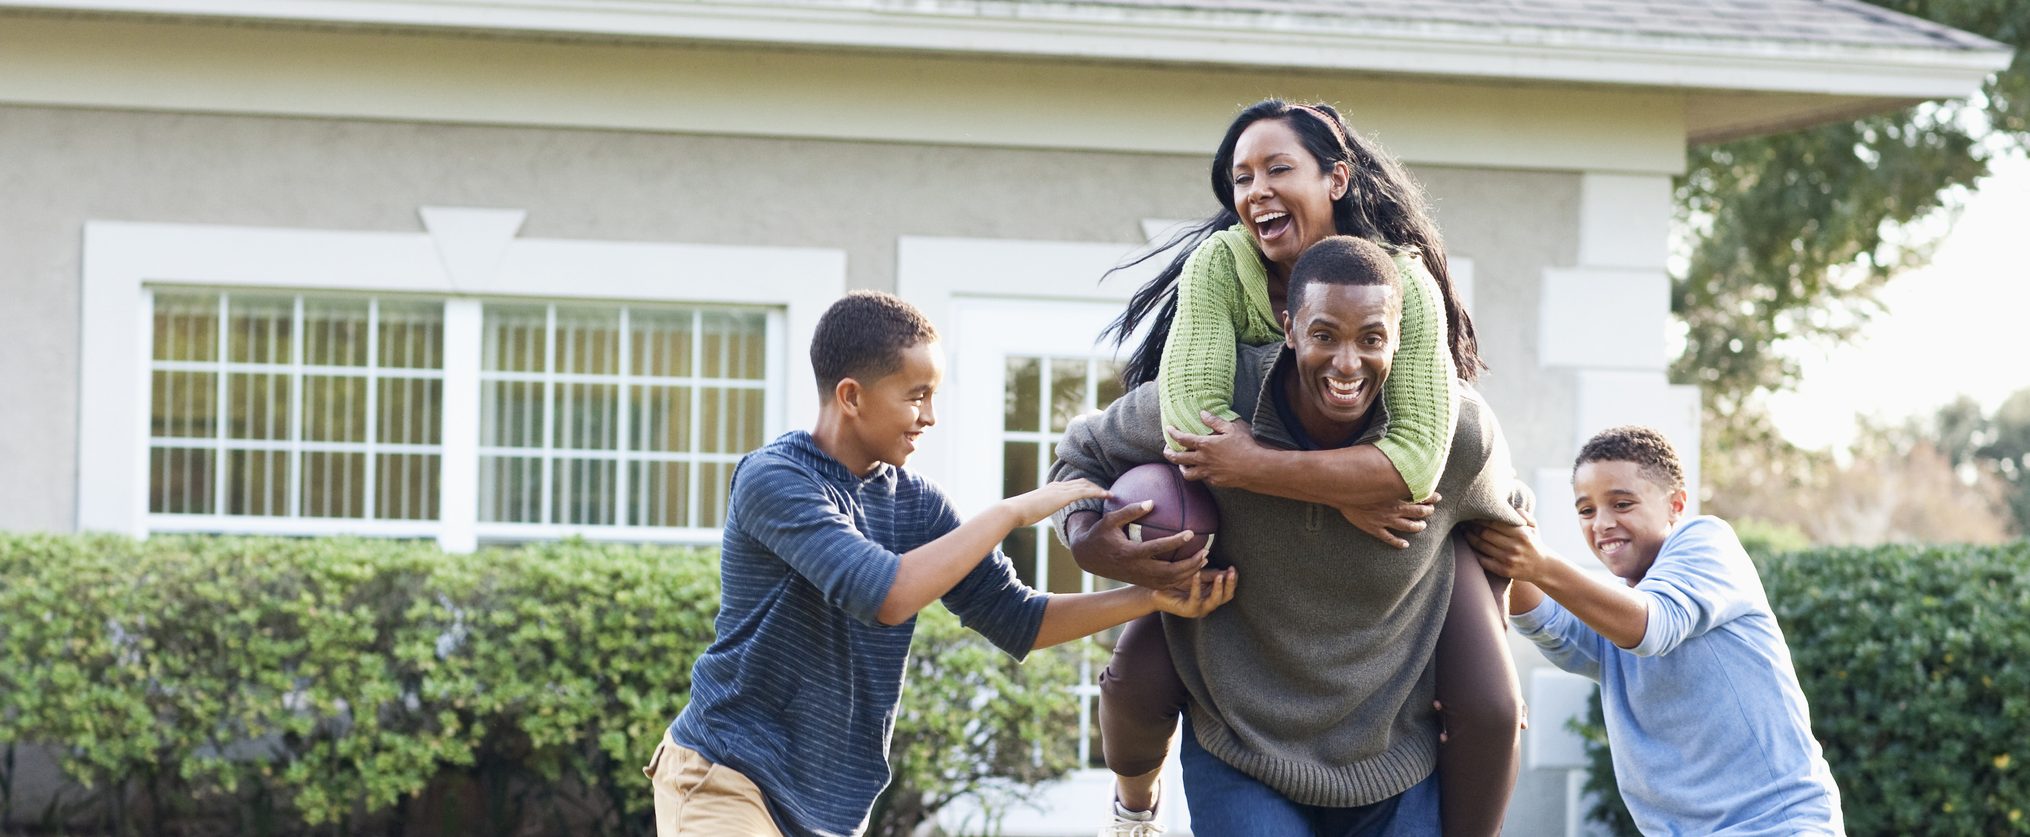 A family plays football outside. The dad gives the mom a piggyback ride and two sons are trying to get the ball and tackle them.